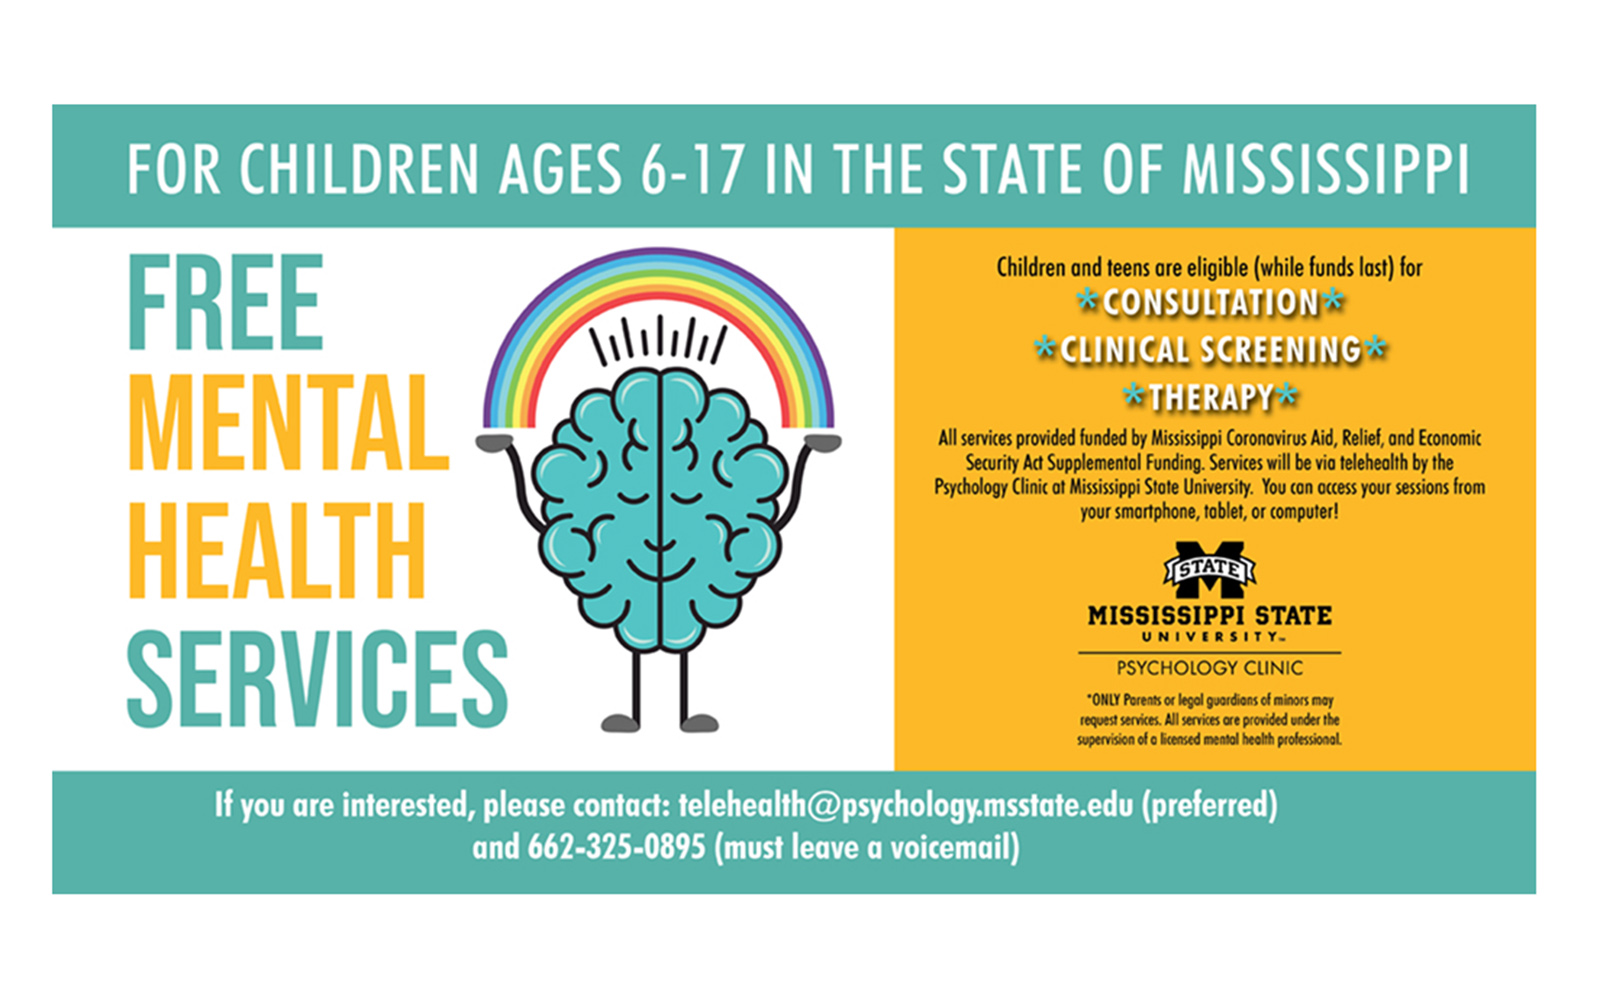 Msu Psychology Clinic Offers Free Mental Health Services For Youth Mississippi State University